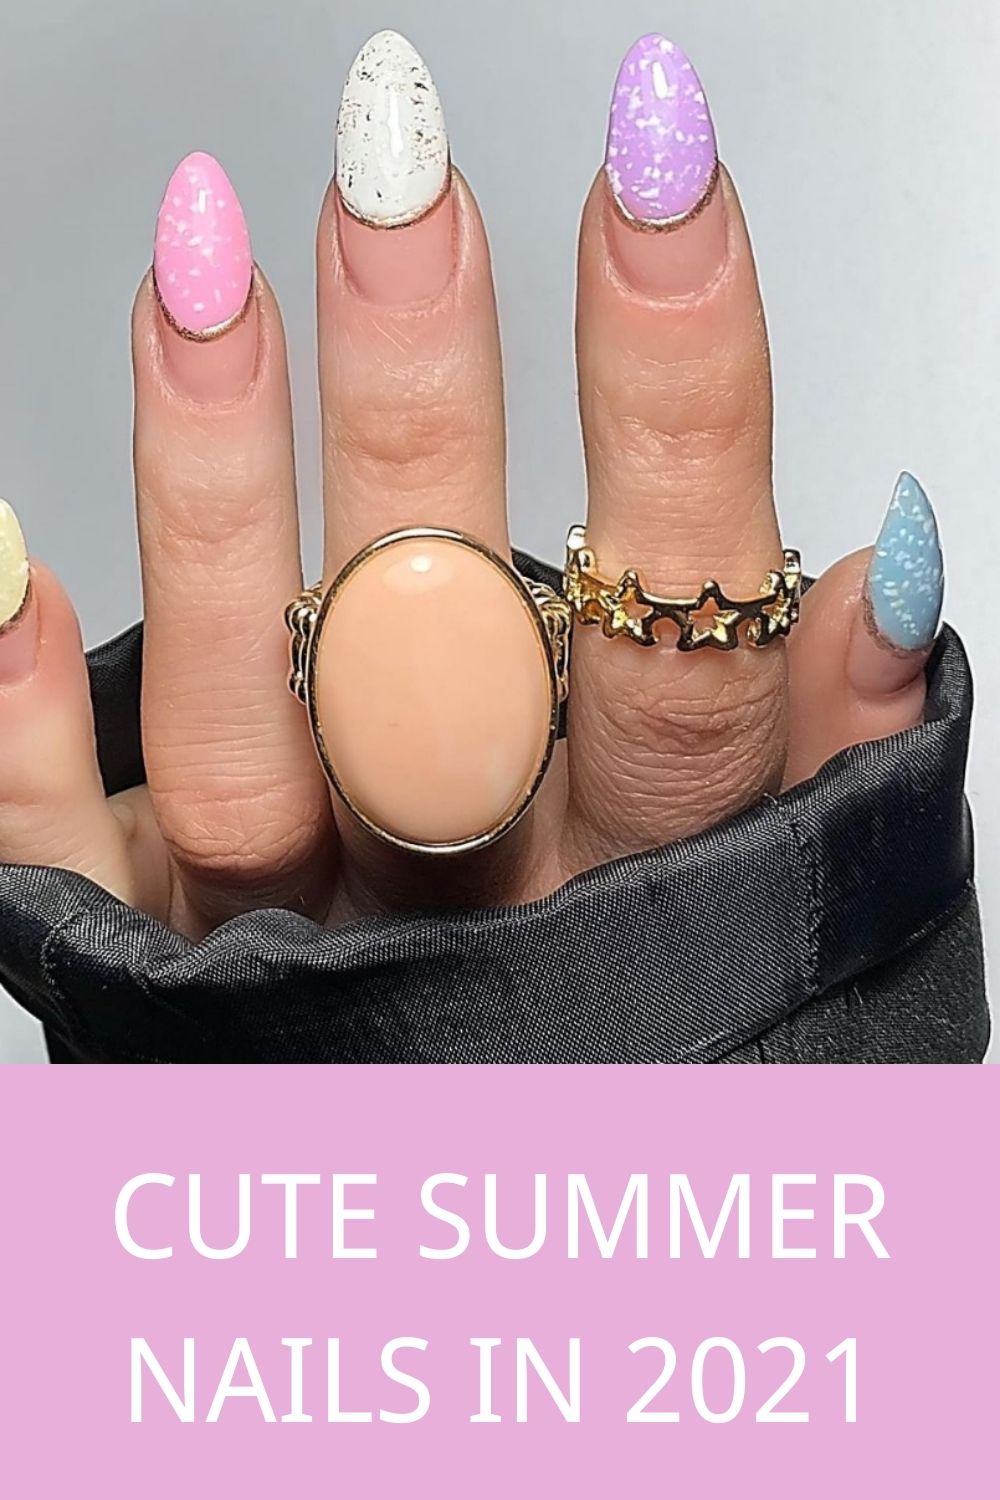 Pretty Summer Acrylic Nails To Try When You Go A Vacation!